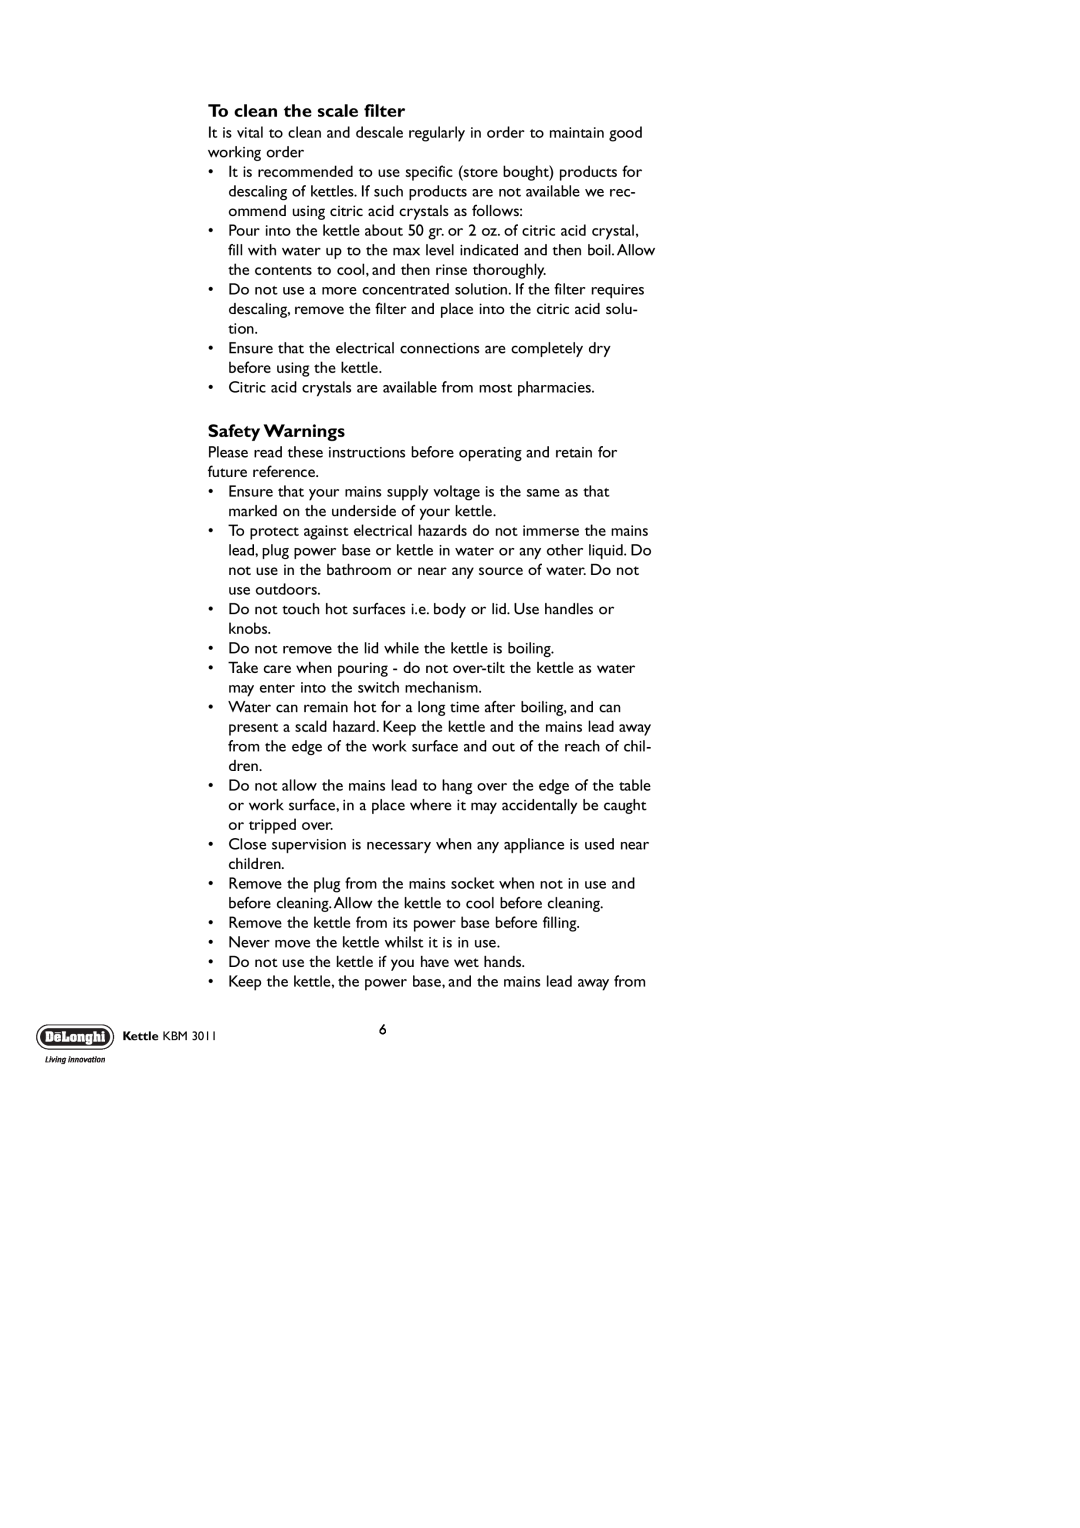 DeLonghi KBM3011 manual To clean the scale filter, Safety Warnings 